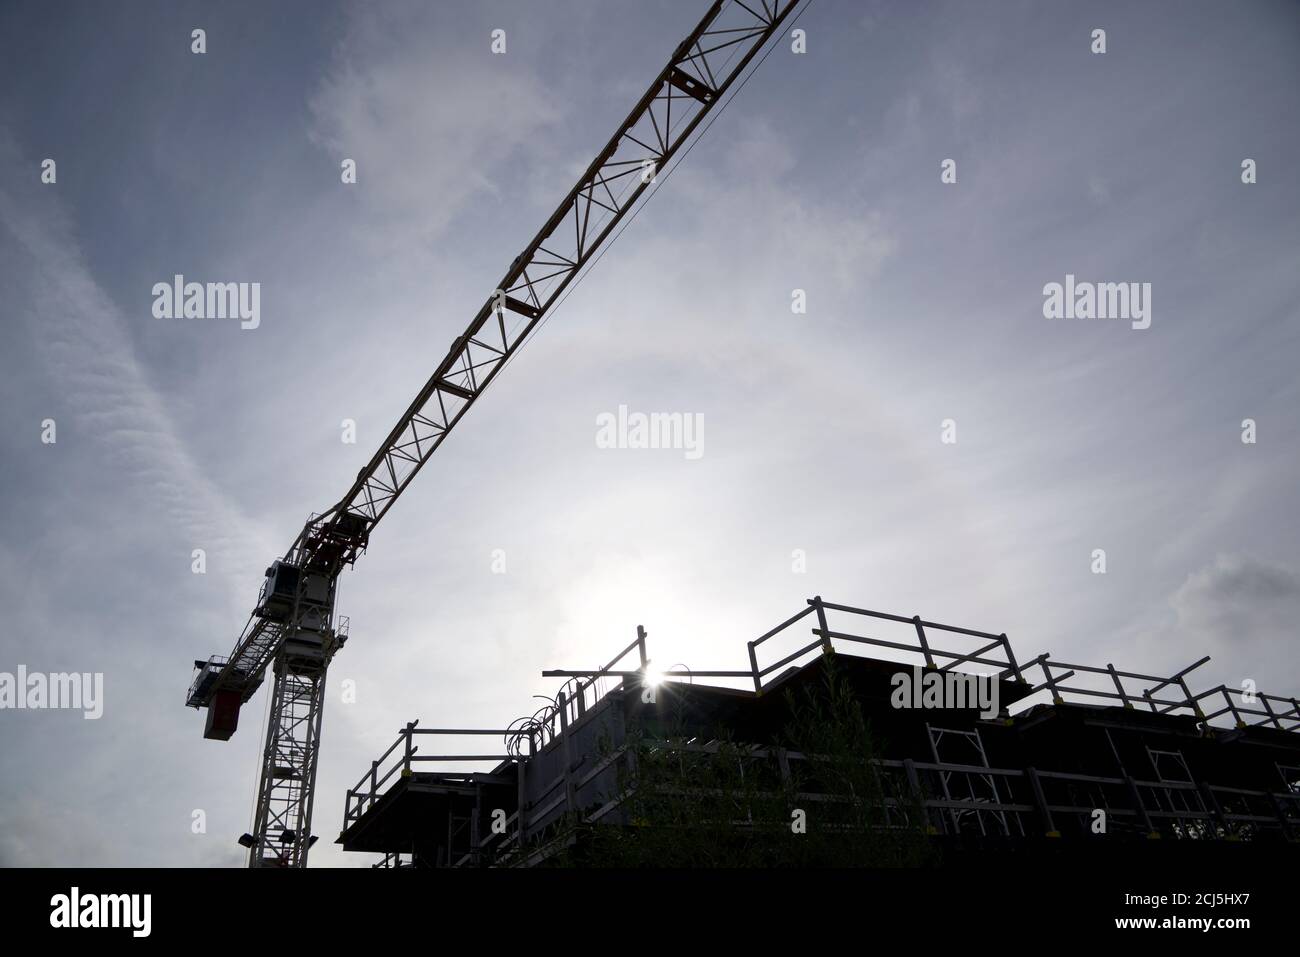 Silhouette of the construction crane in a construction site with lens flare. Stock Photo